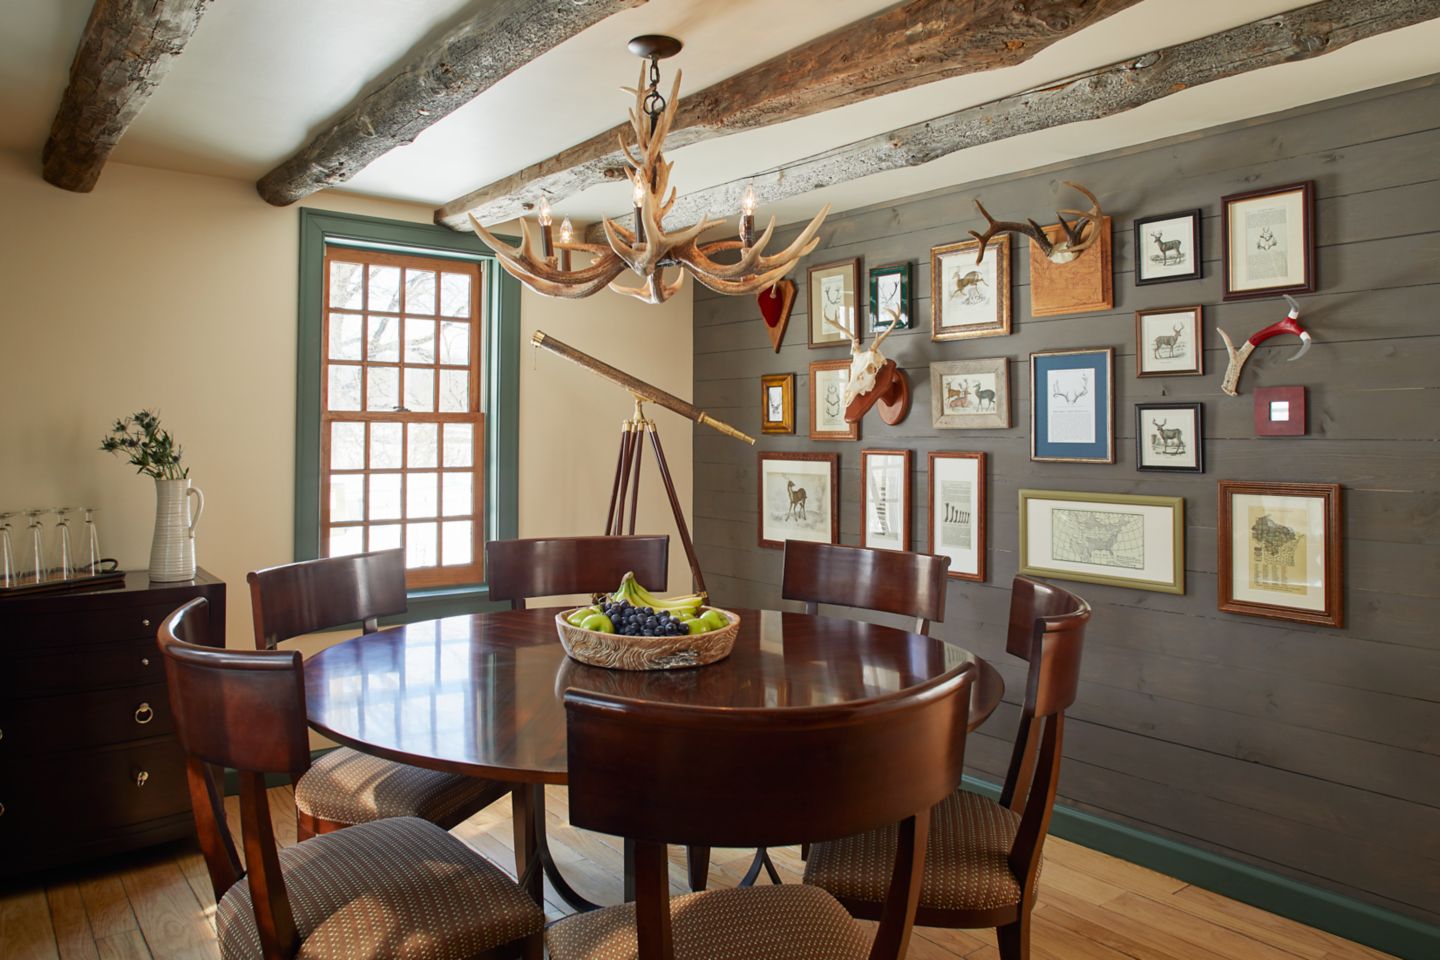 The round dining table and 6 chairs with antler lighting fixture along with various deer paintings on the walls